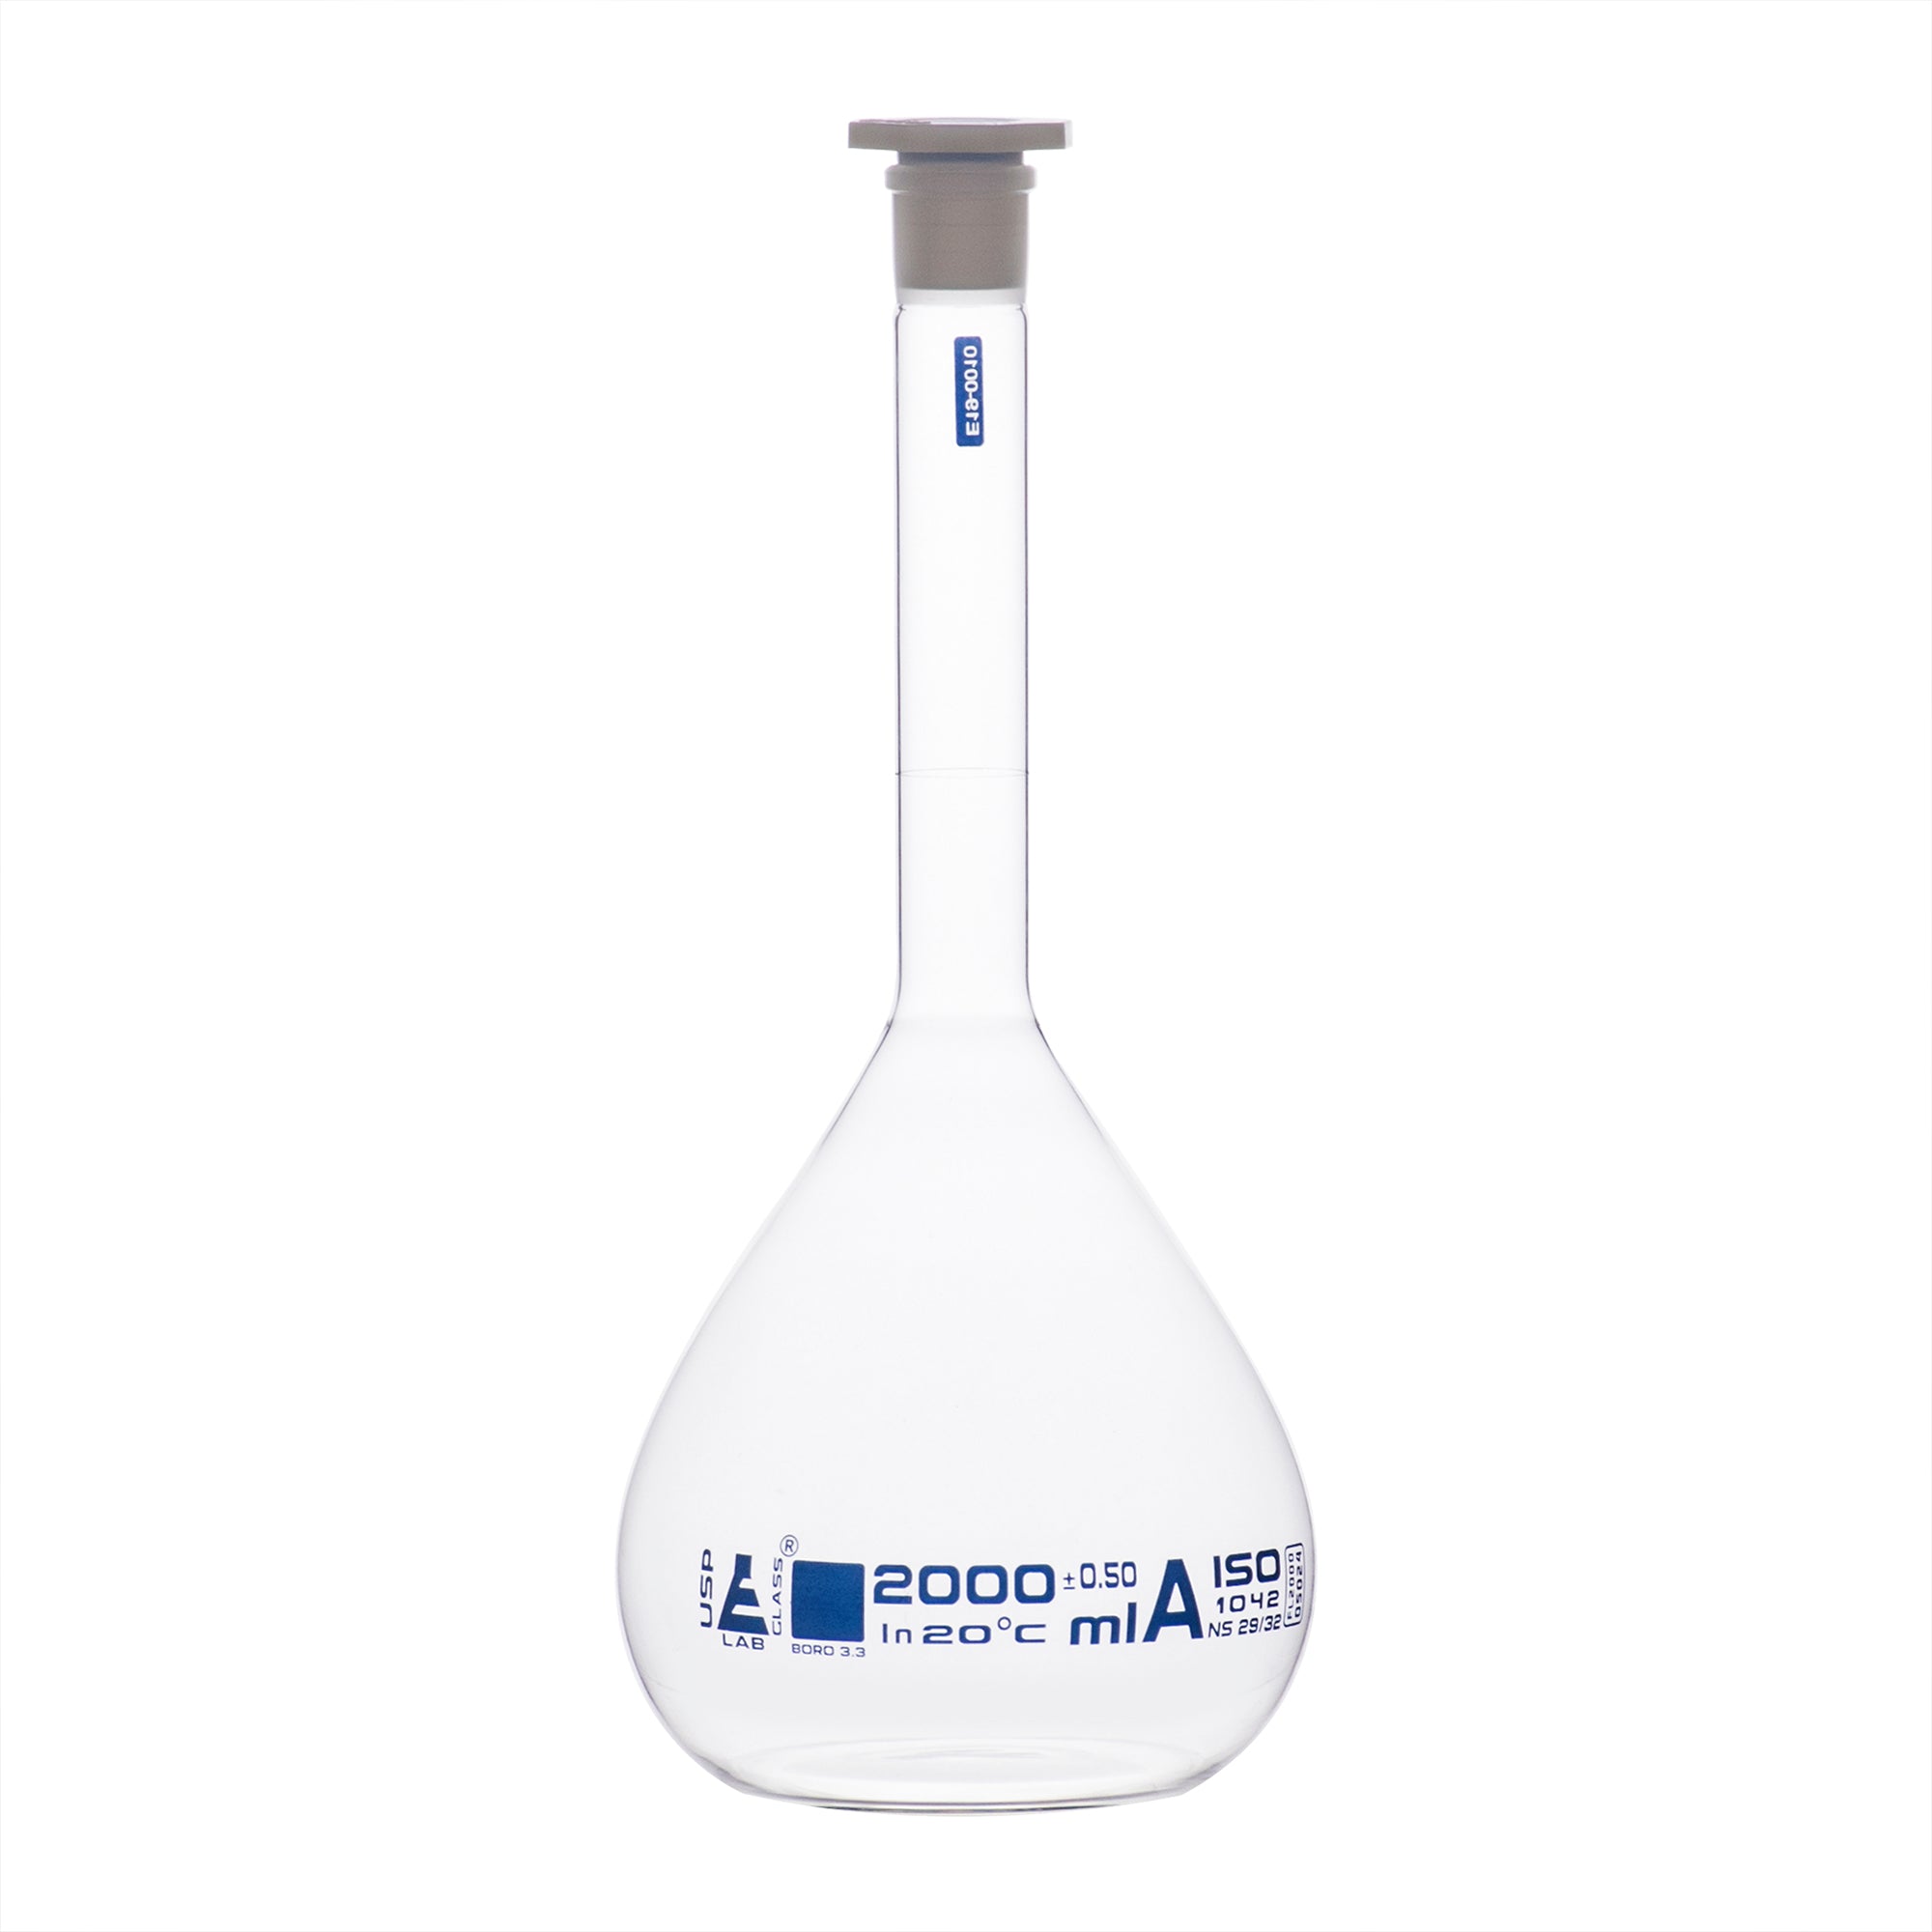 Borosilicate Glass Volumetric Flask with Solid Glass Stopper, 2000 ml, USP Class A with Individual Work Certificate, Autoclavable